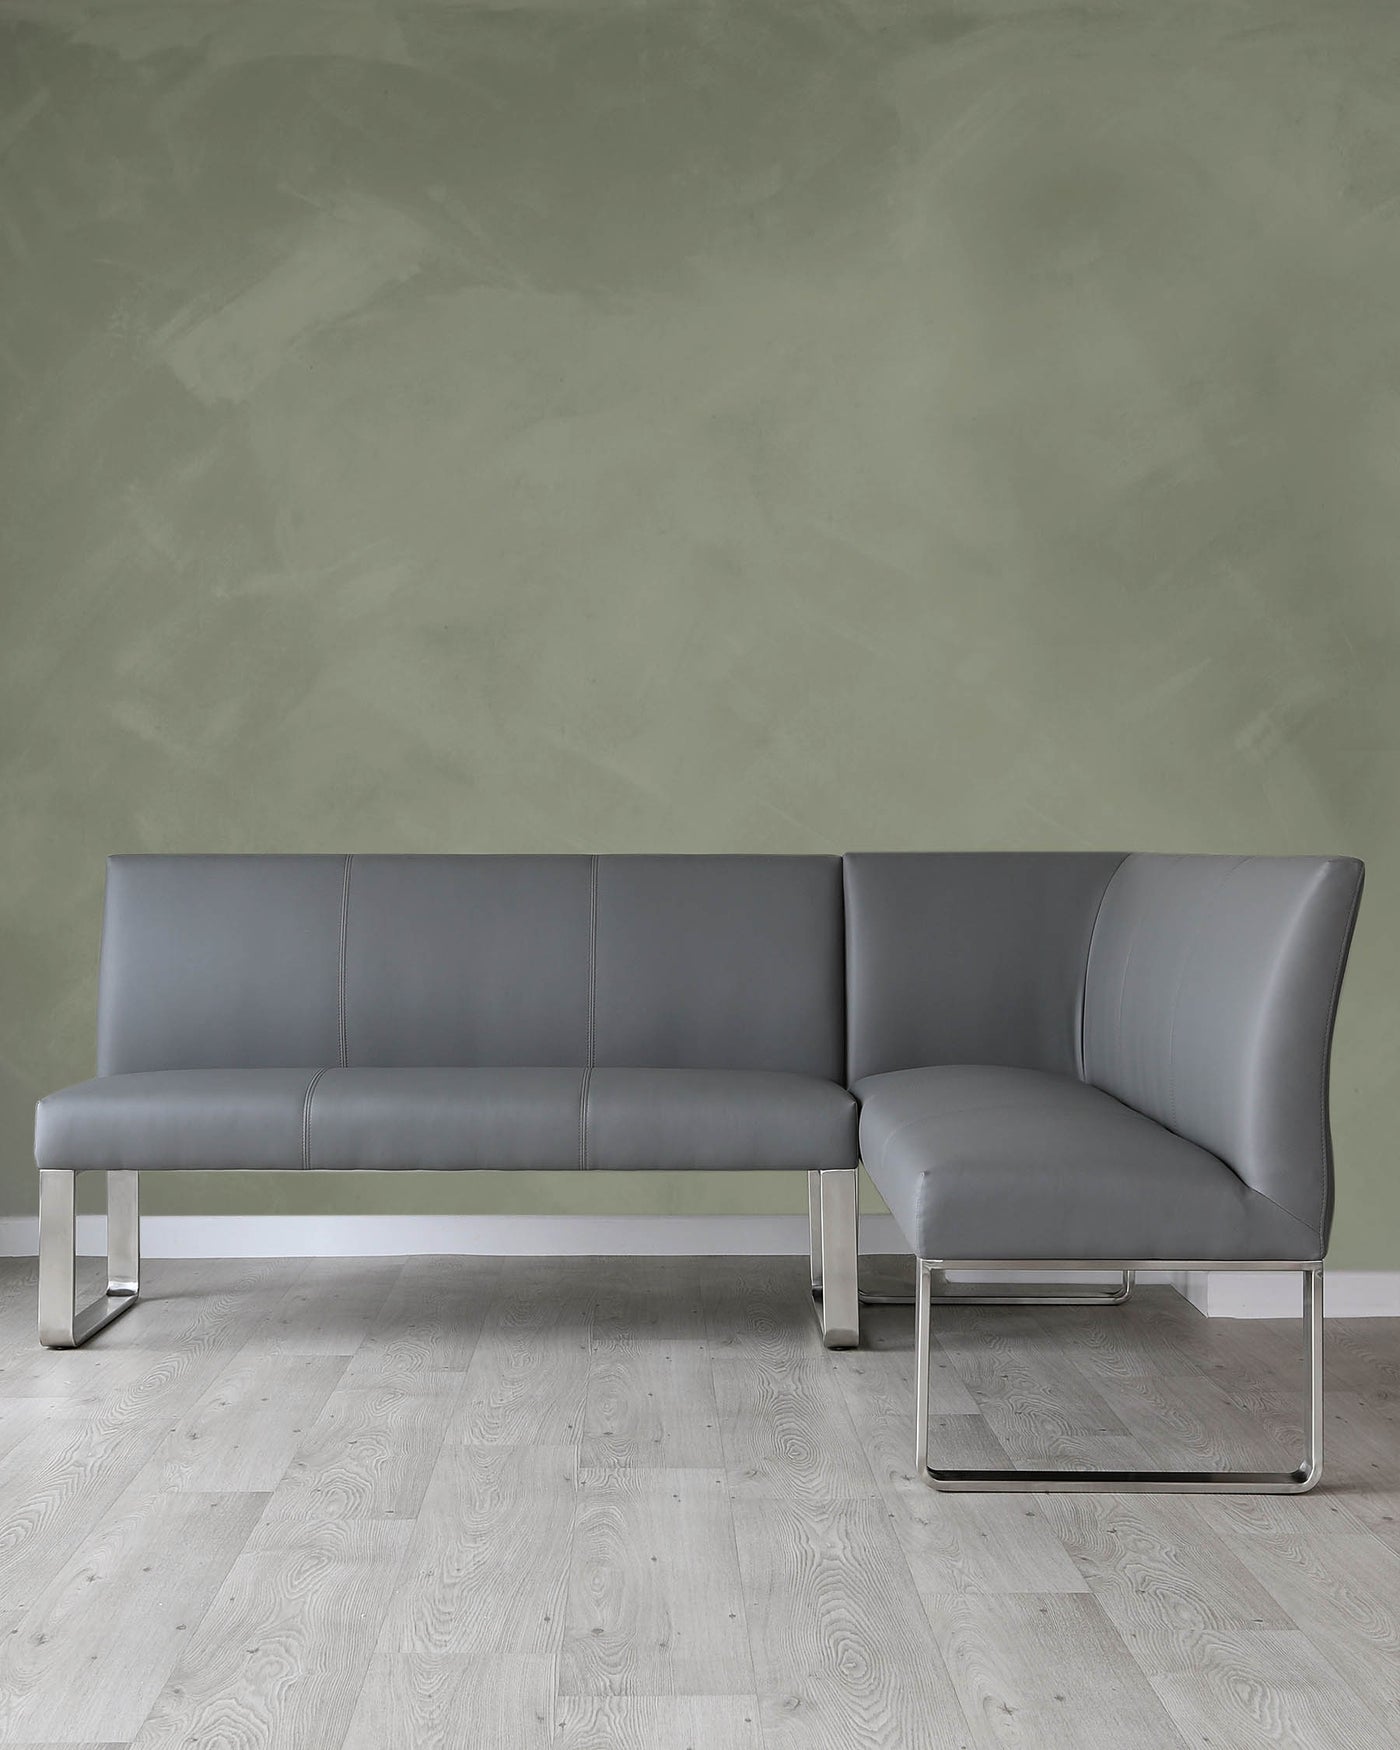 Modern minimalist L-shaped sectional sofa with a sleek design, featuring grey upholstery and chrome metal legs.